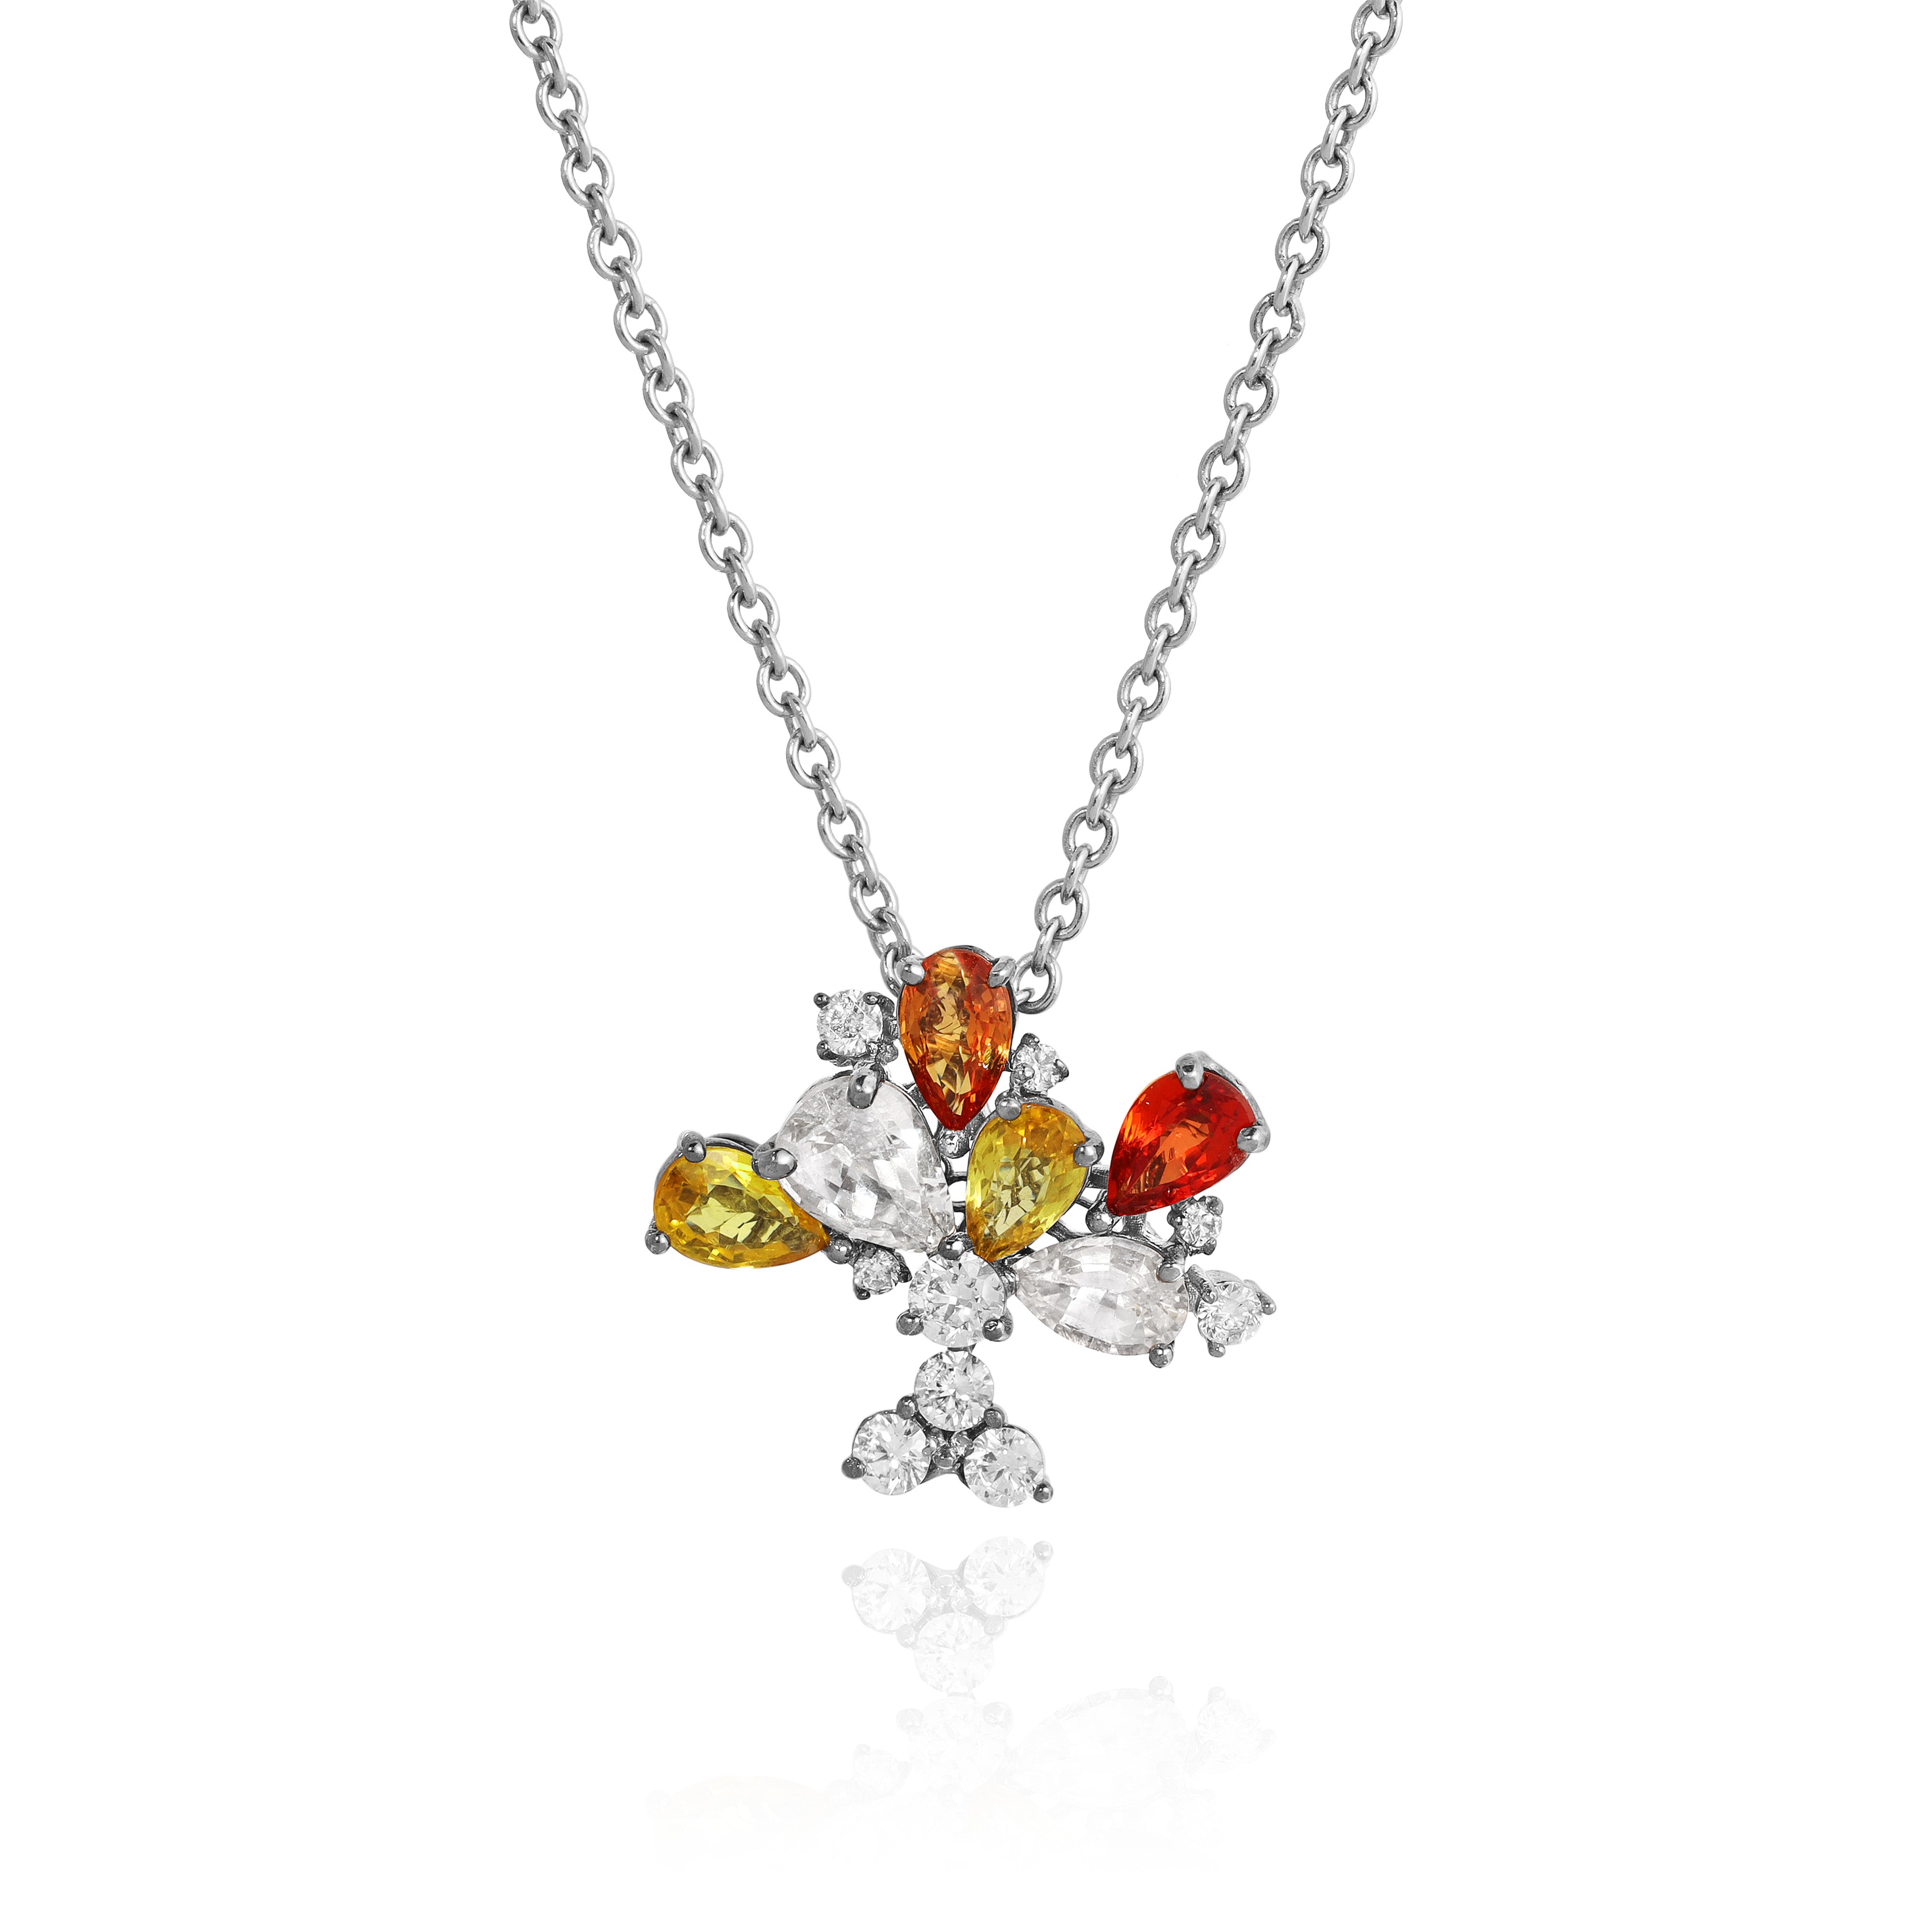 White Gold Necklace with Orange, Yellow, and White Sapphires, and Diamonds, Small